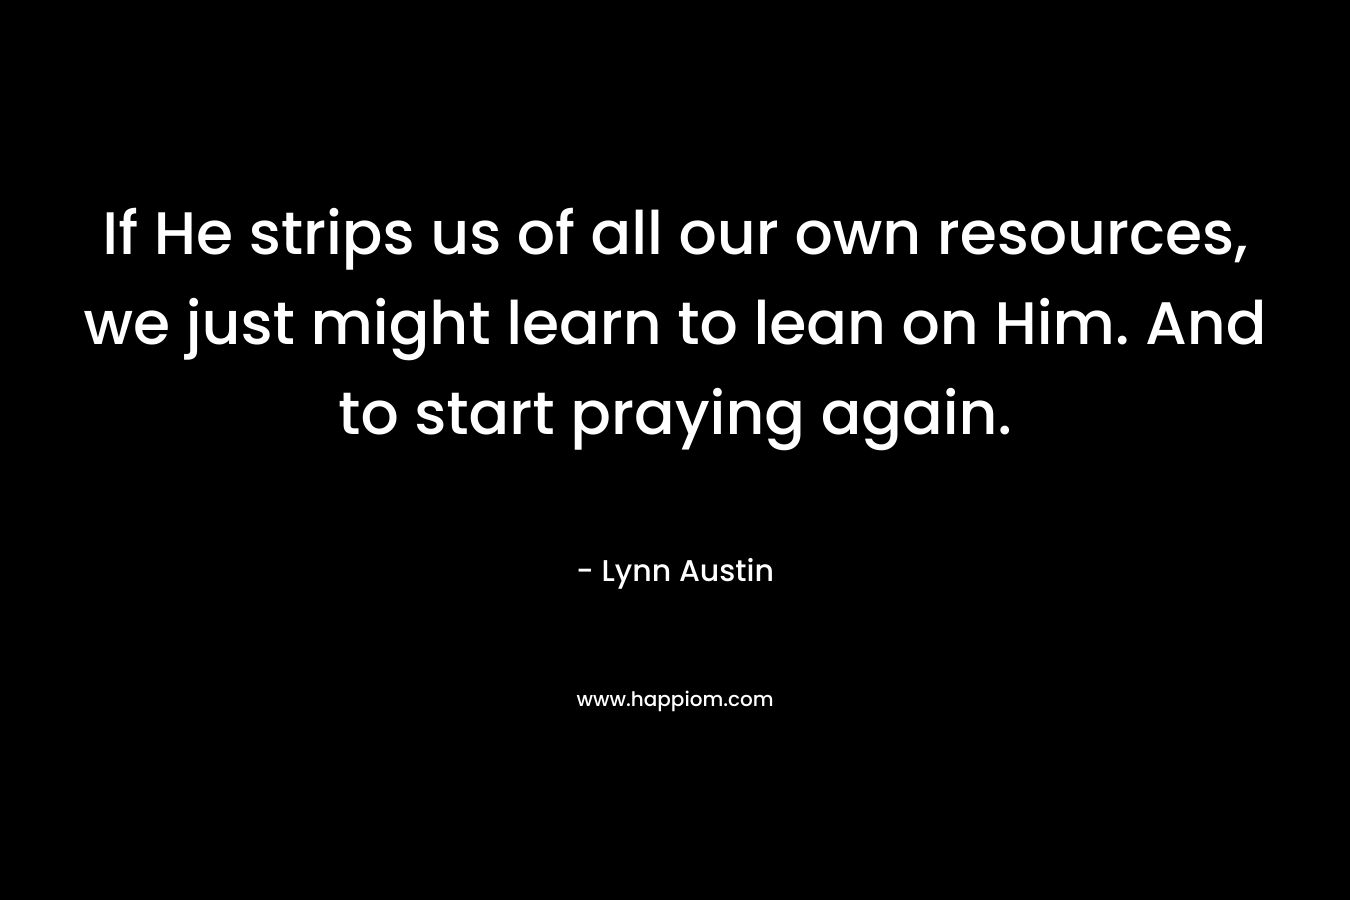 If He strips us of all our own resources, we just might learn to lean on Him. And to start praying again.